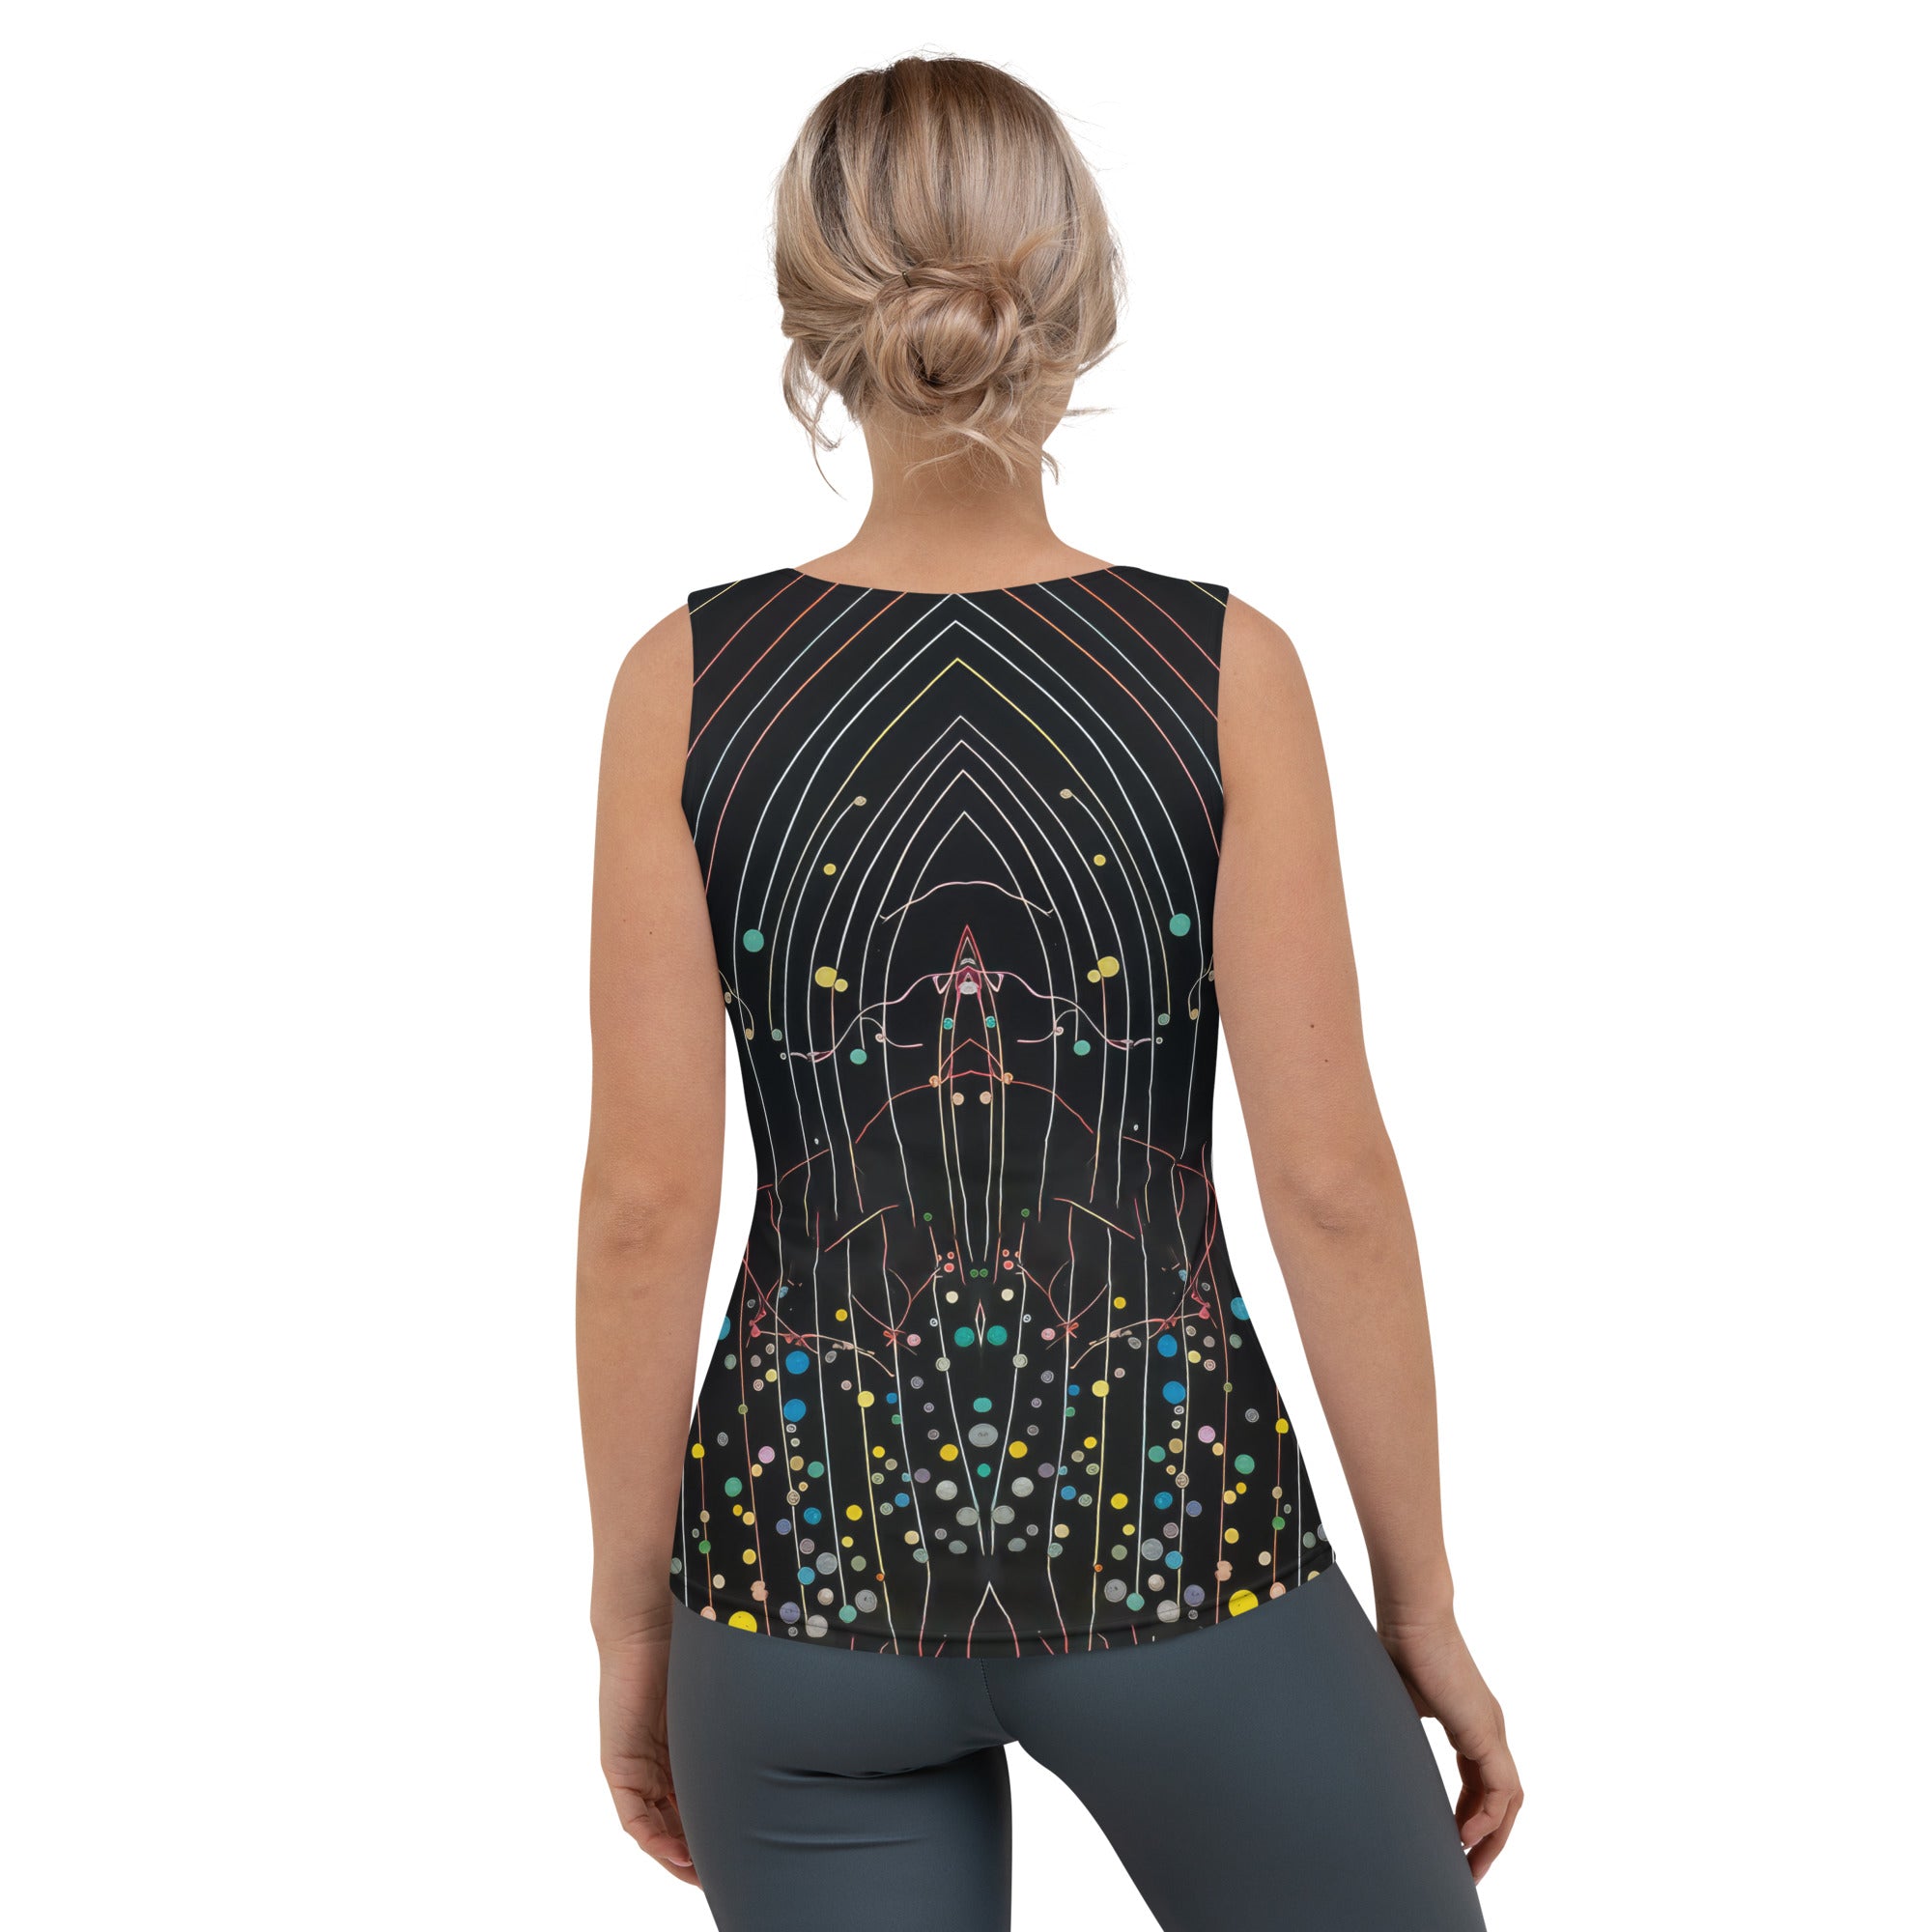 Close-up of Bohemian Blossoms Tank Top's floral pattern.